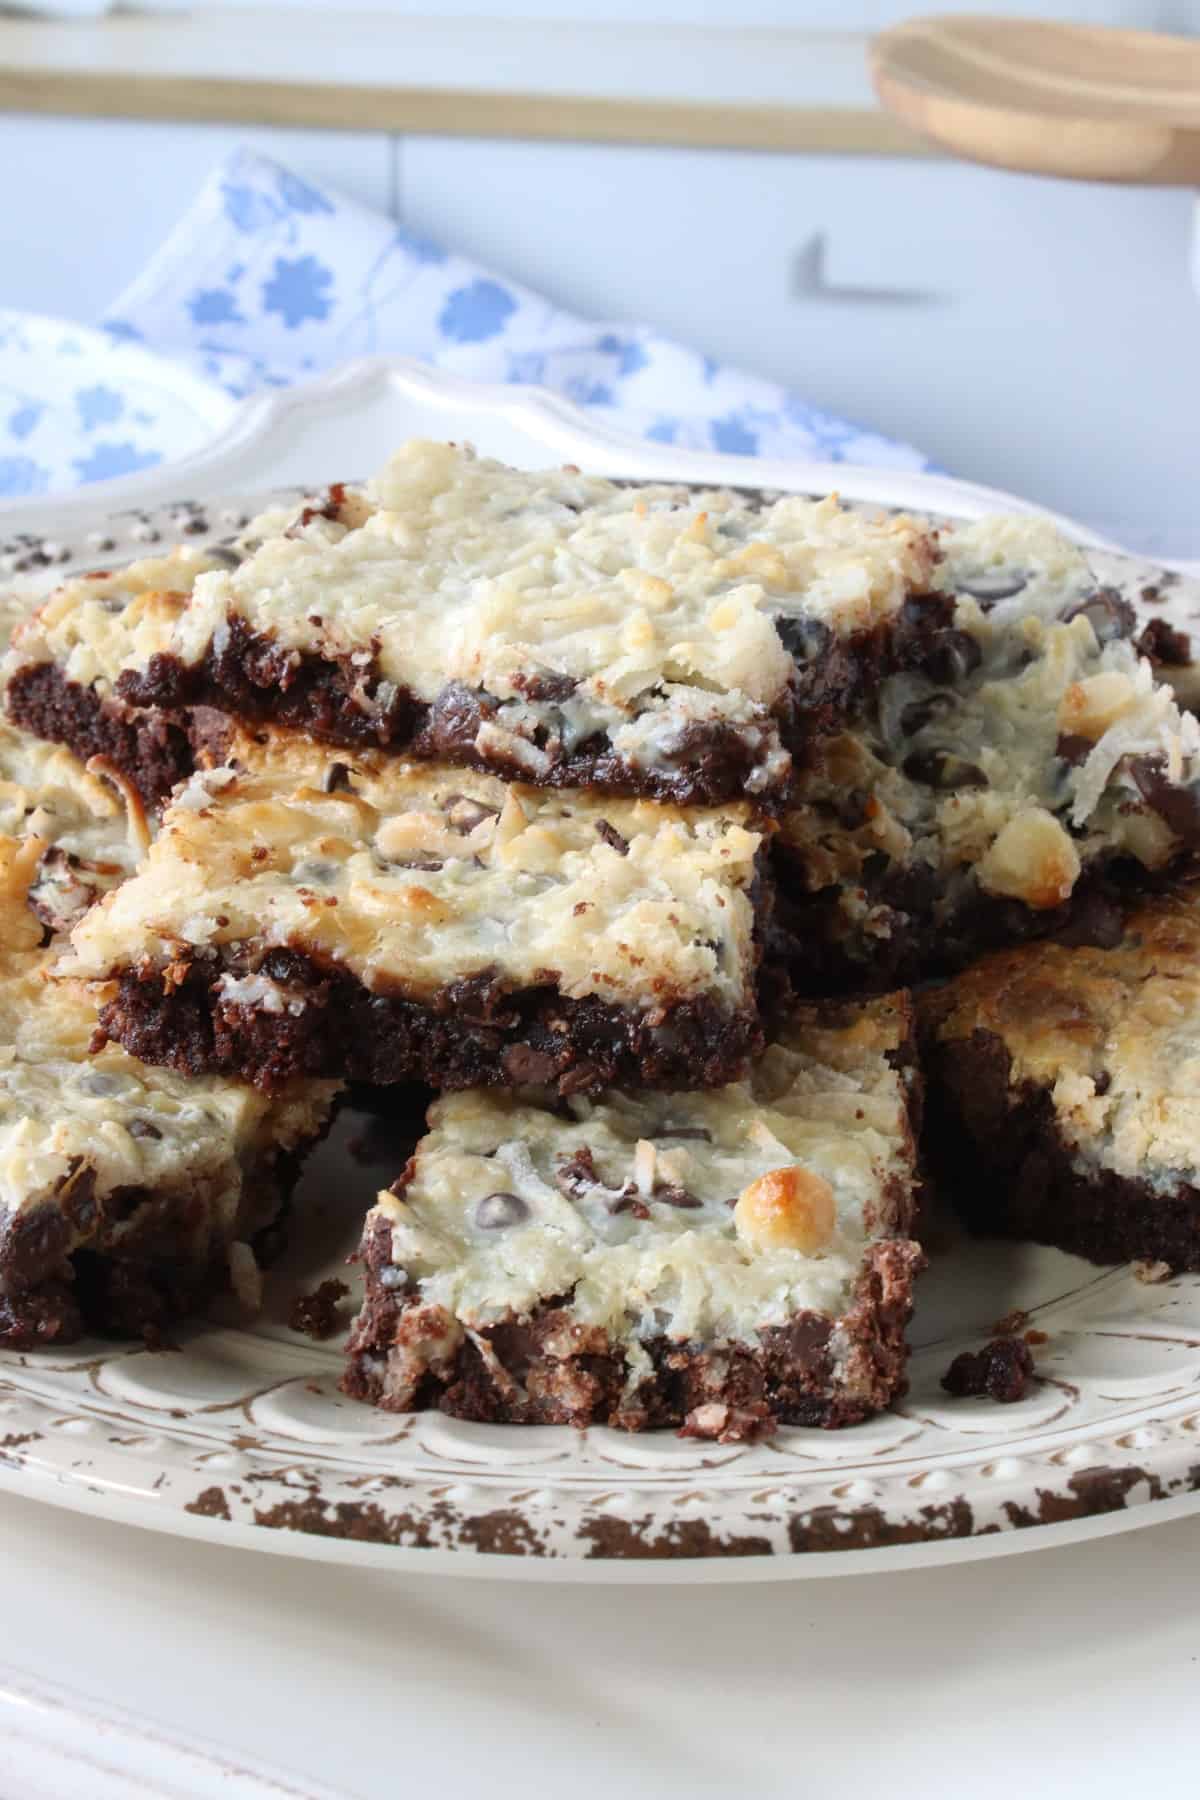 A stack of baked Coconut Brownies on a plate.